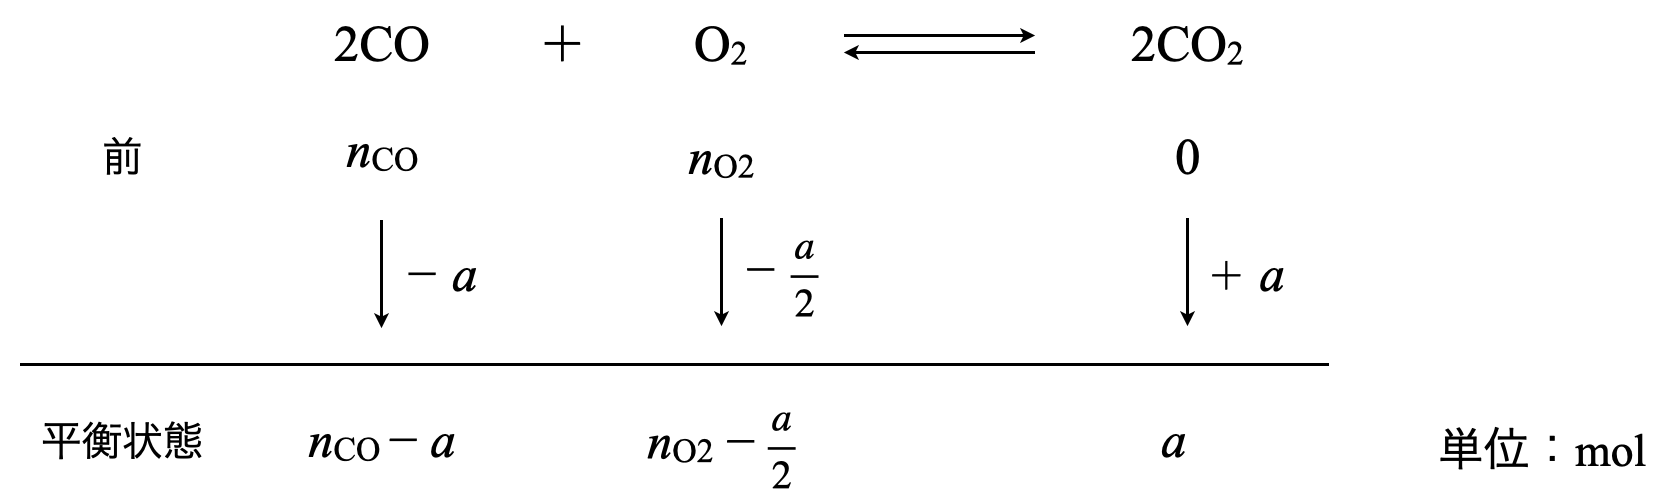 equation of state